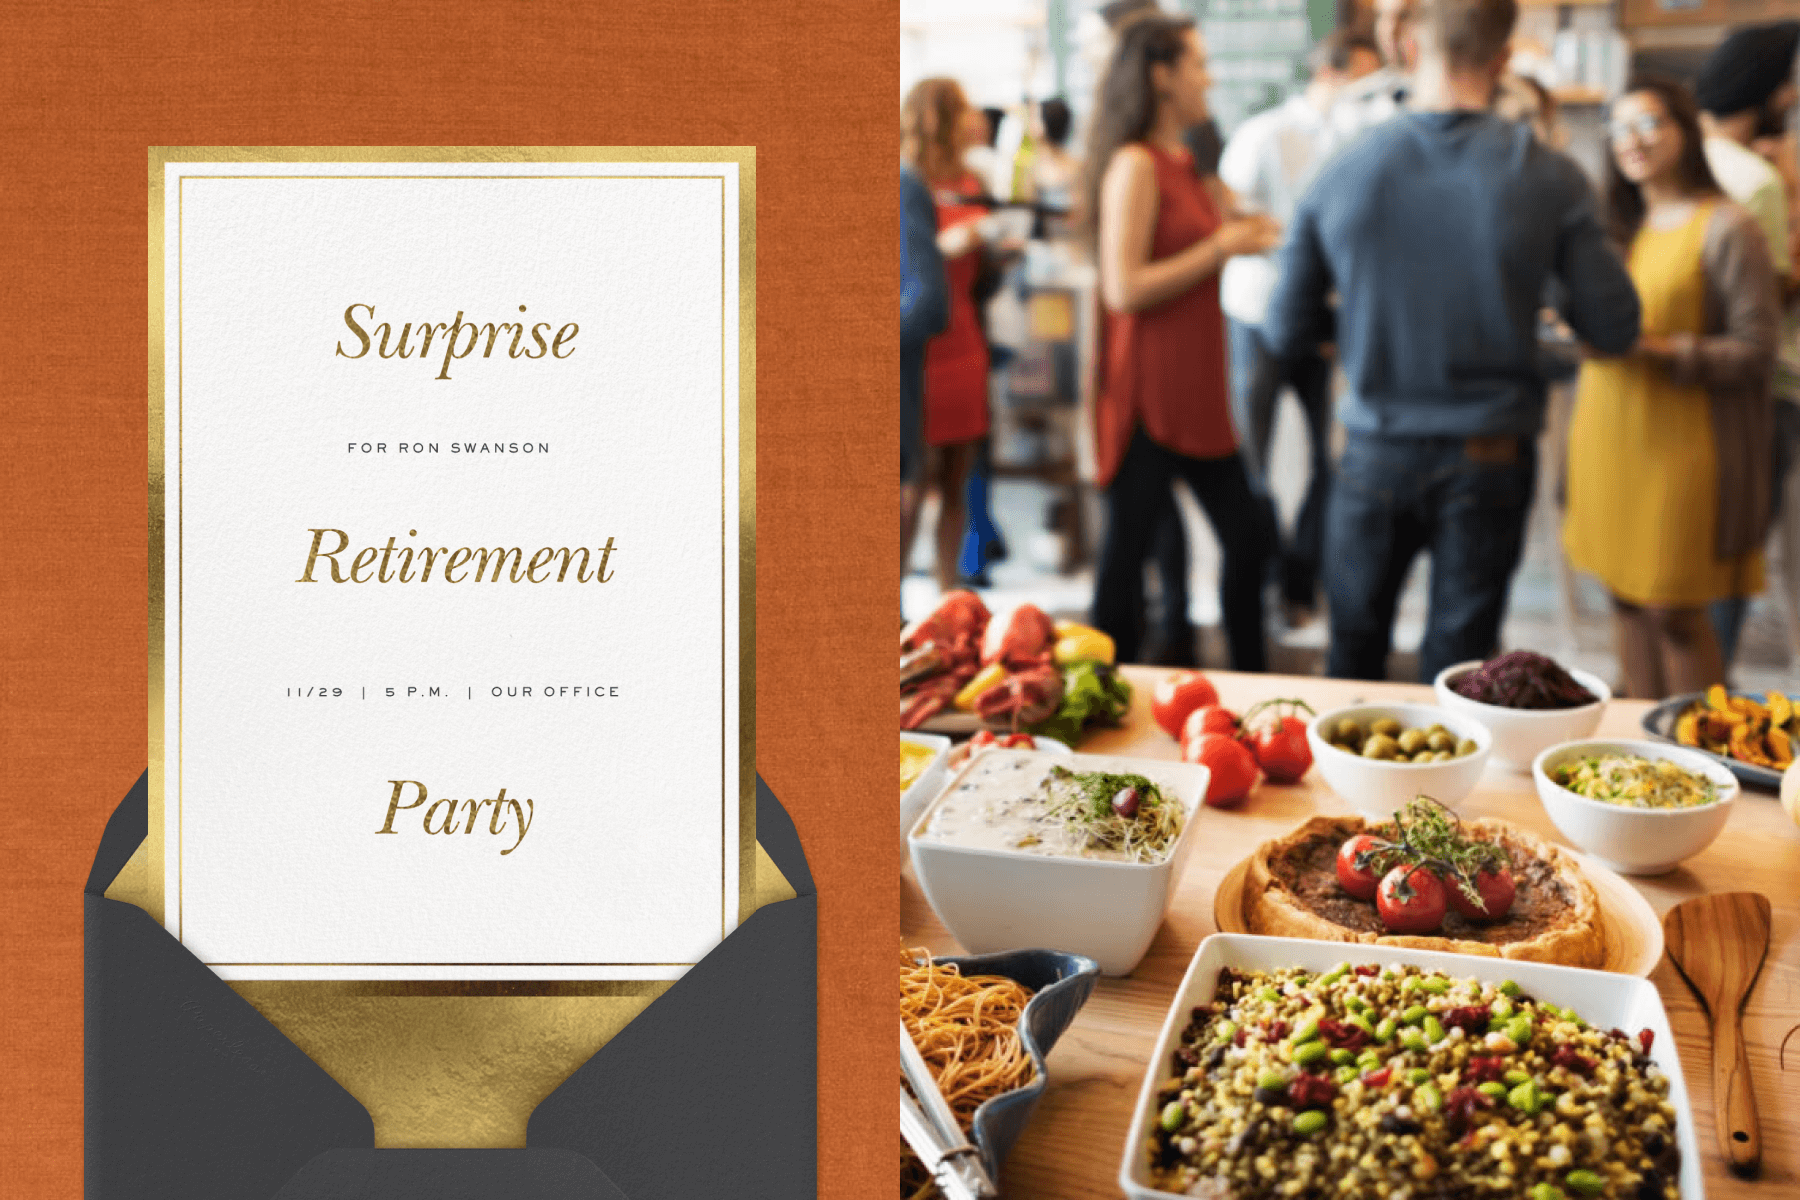 Left: A retirement party invitation has a double gold border and the words “Surprise Retirement Party” floating in the center over a black envelope with gold liner. Right: A table filled with summer-y vegetarian dishes and several people mingling in the background.